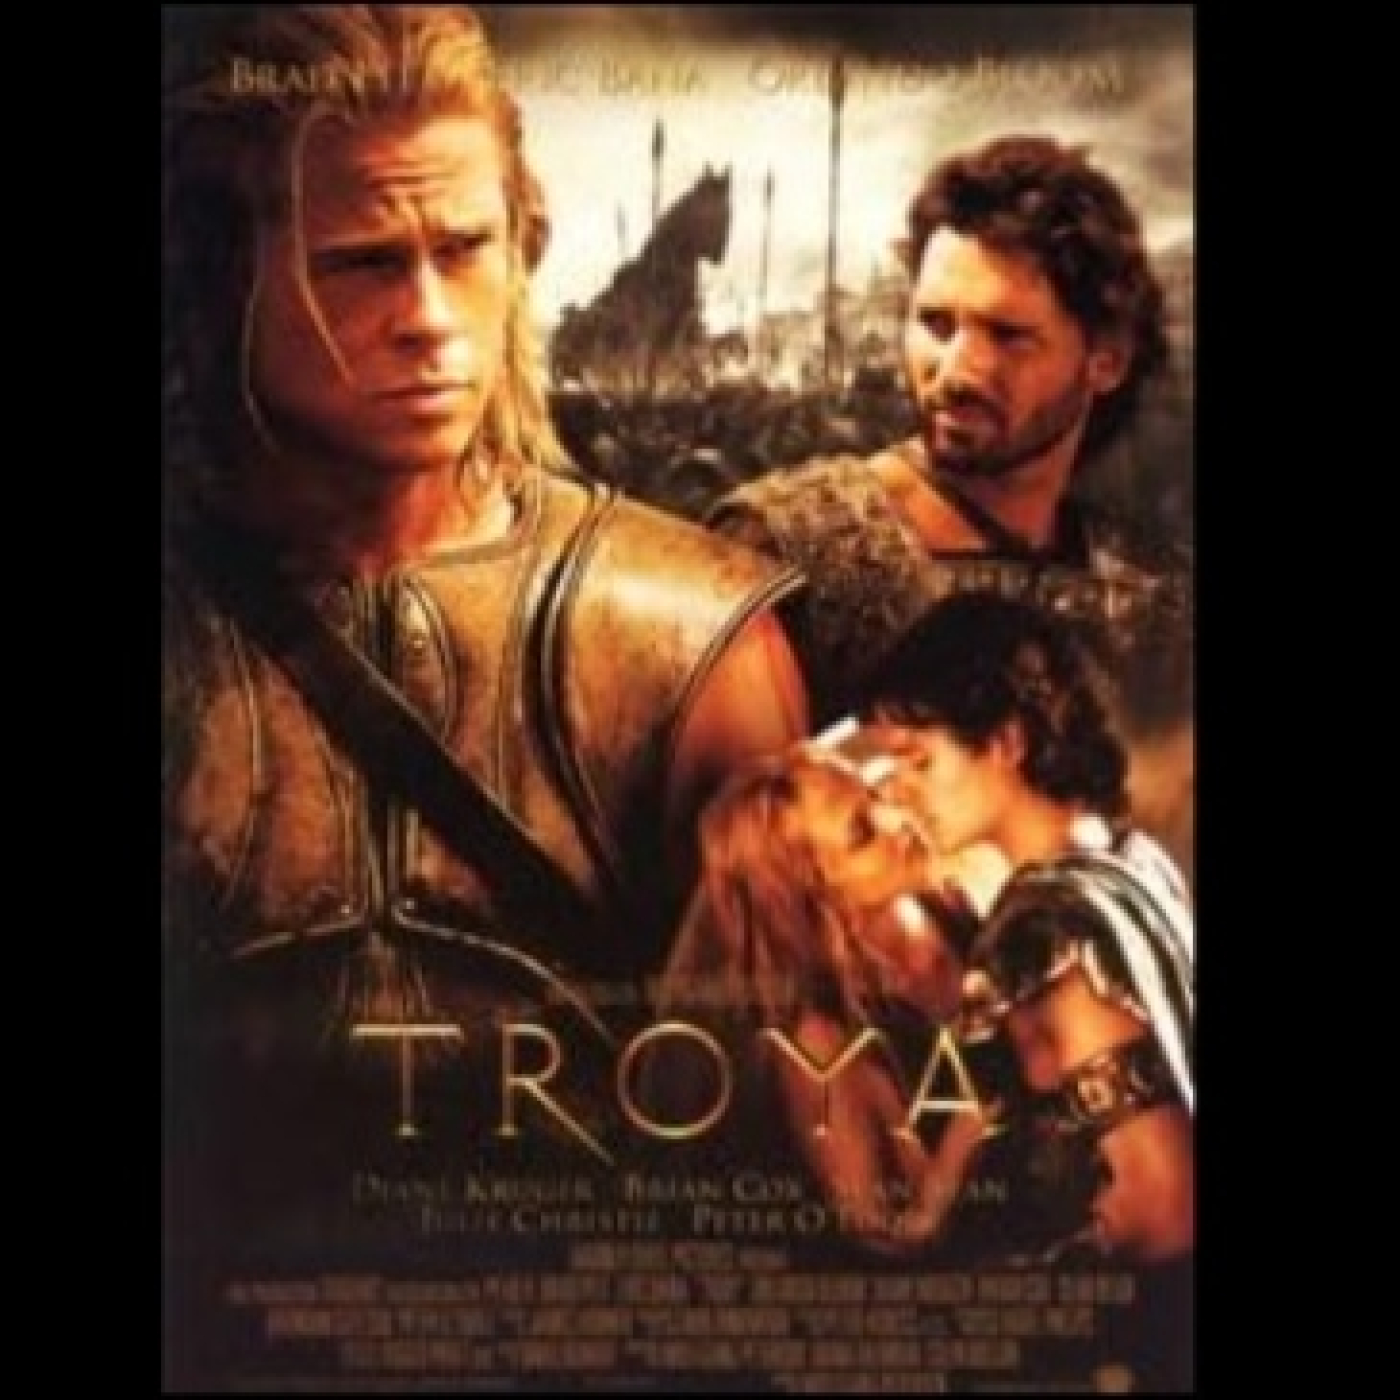 Movies Requests - Troy - 2004